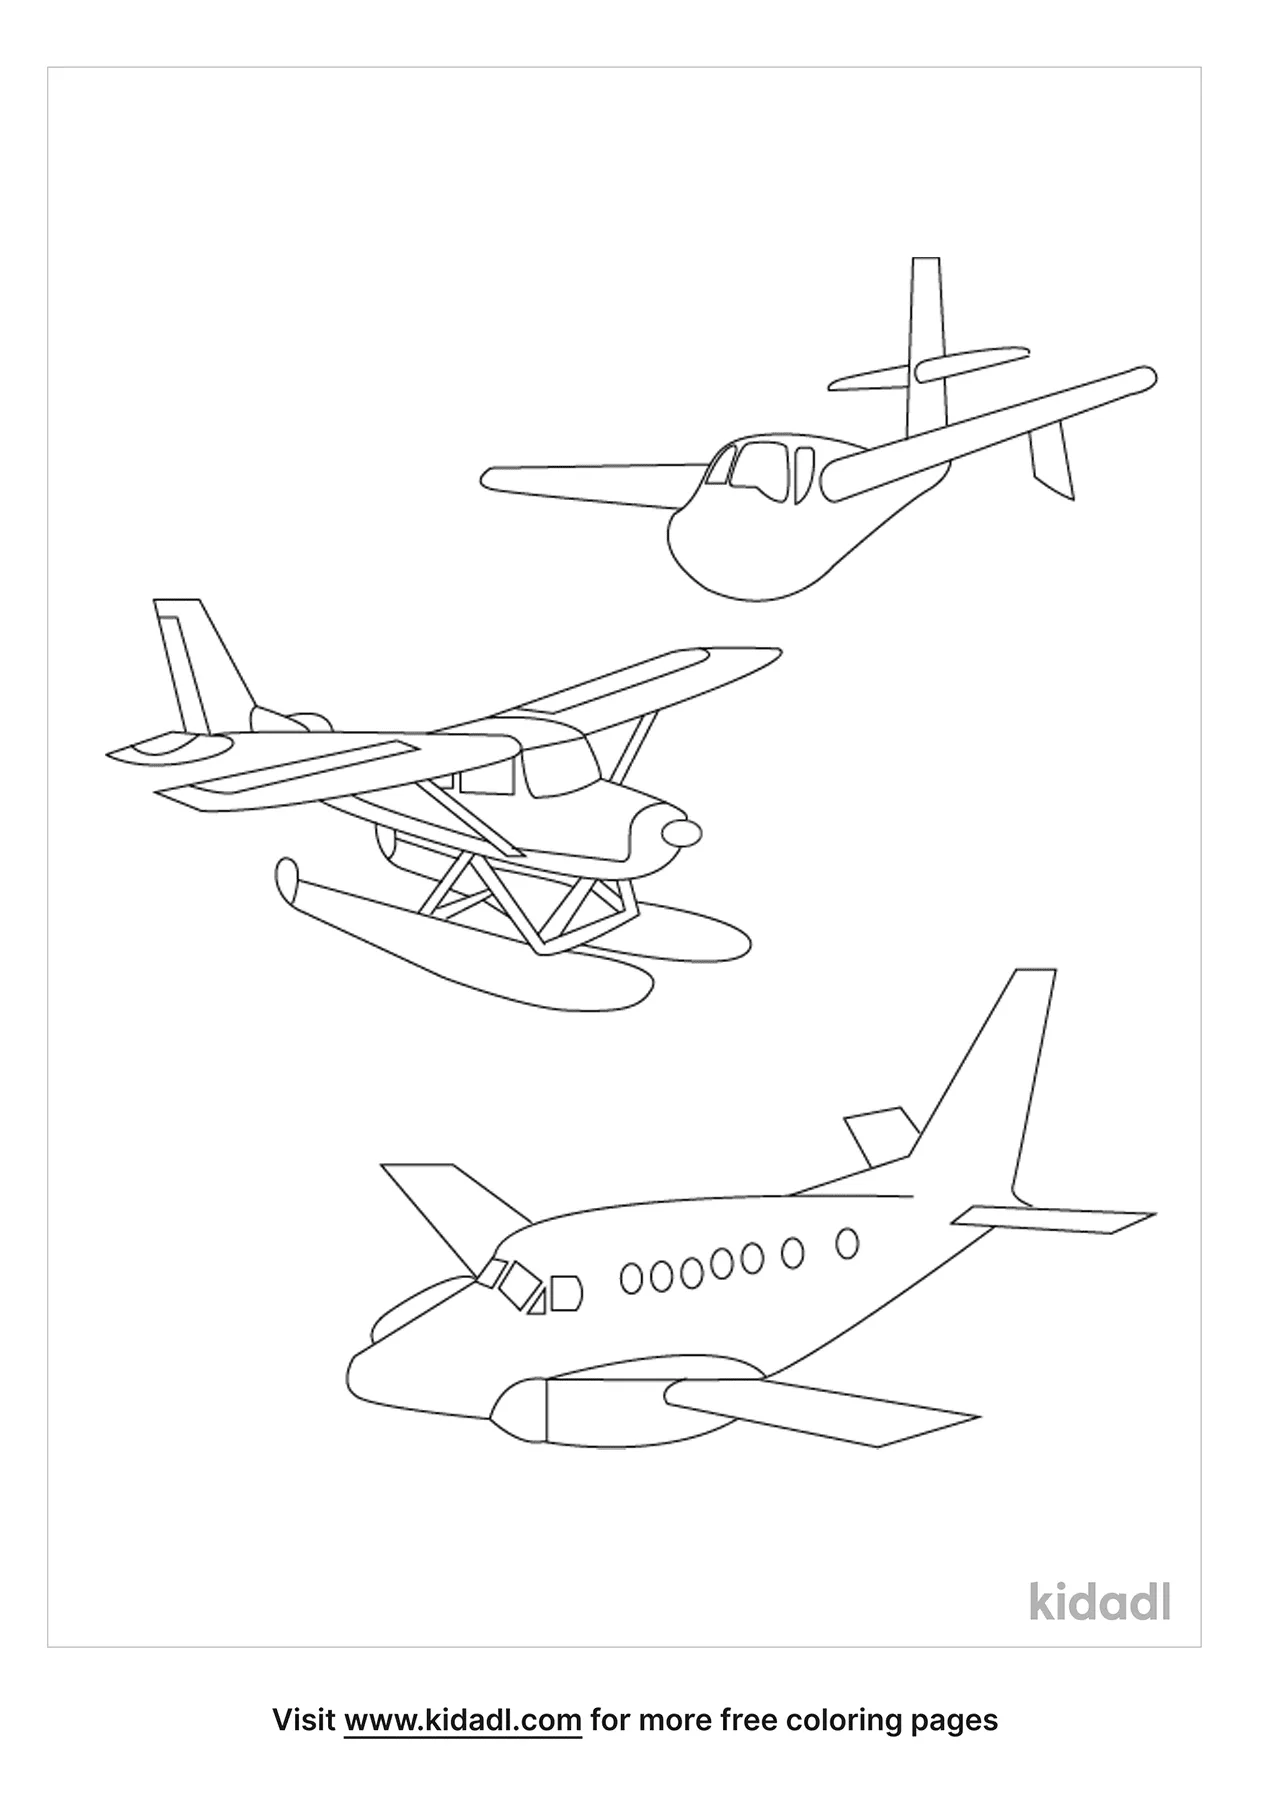 Different Kinds Of Airplanes Coloring Page